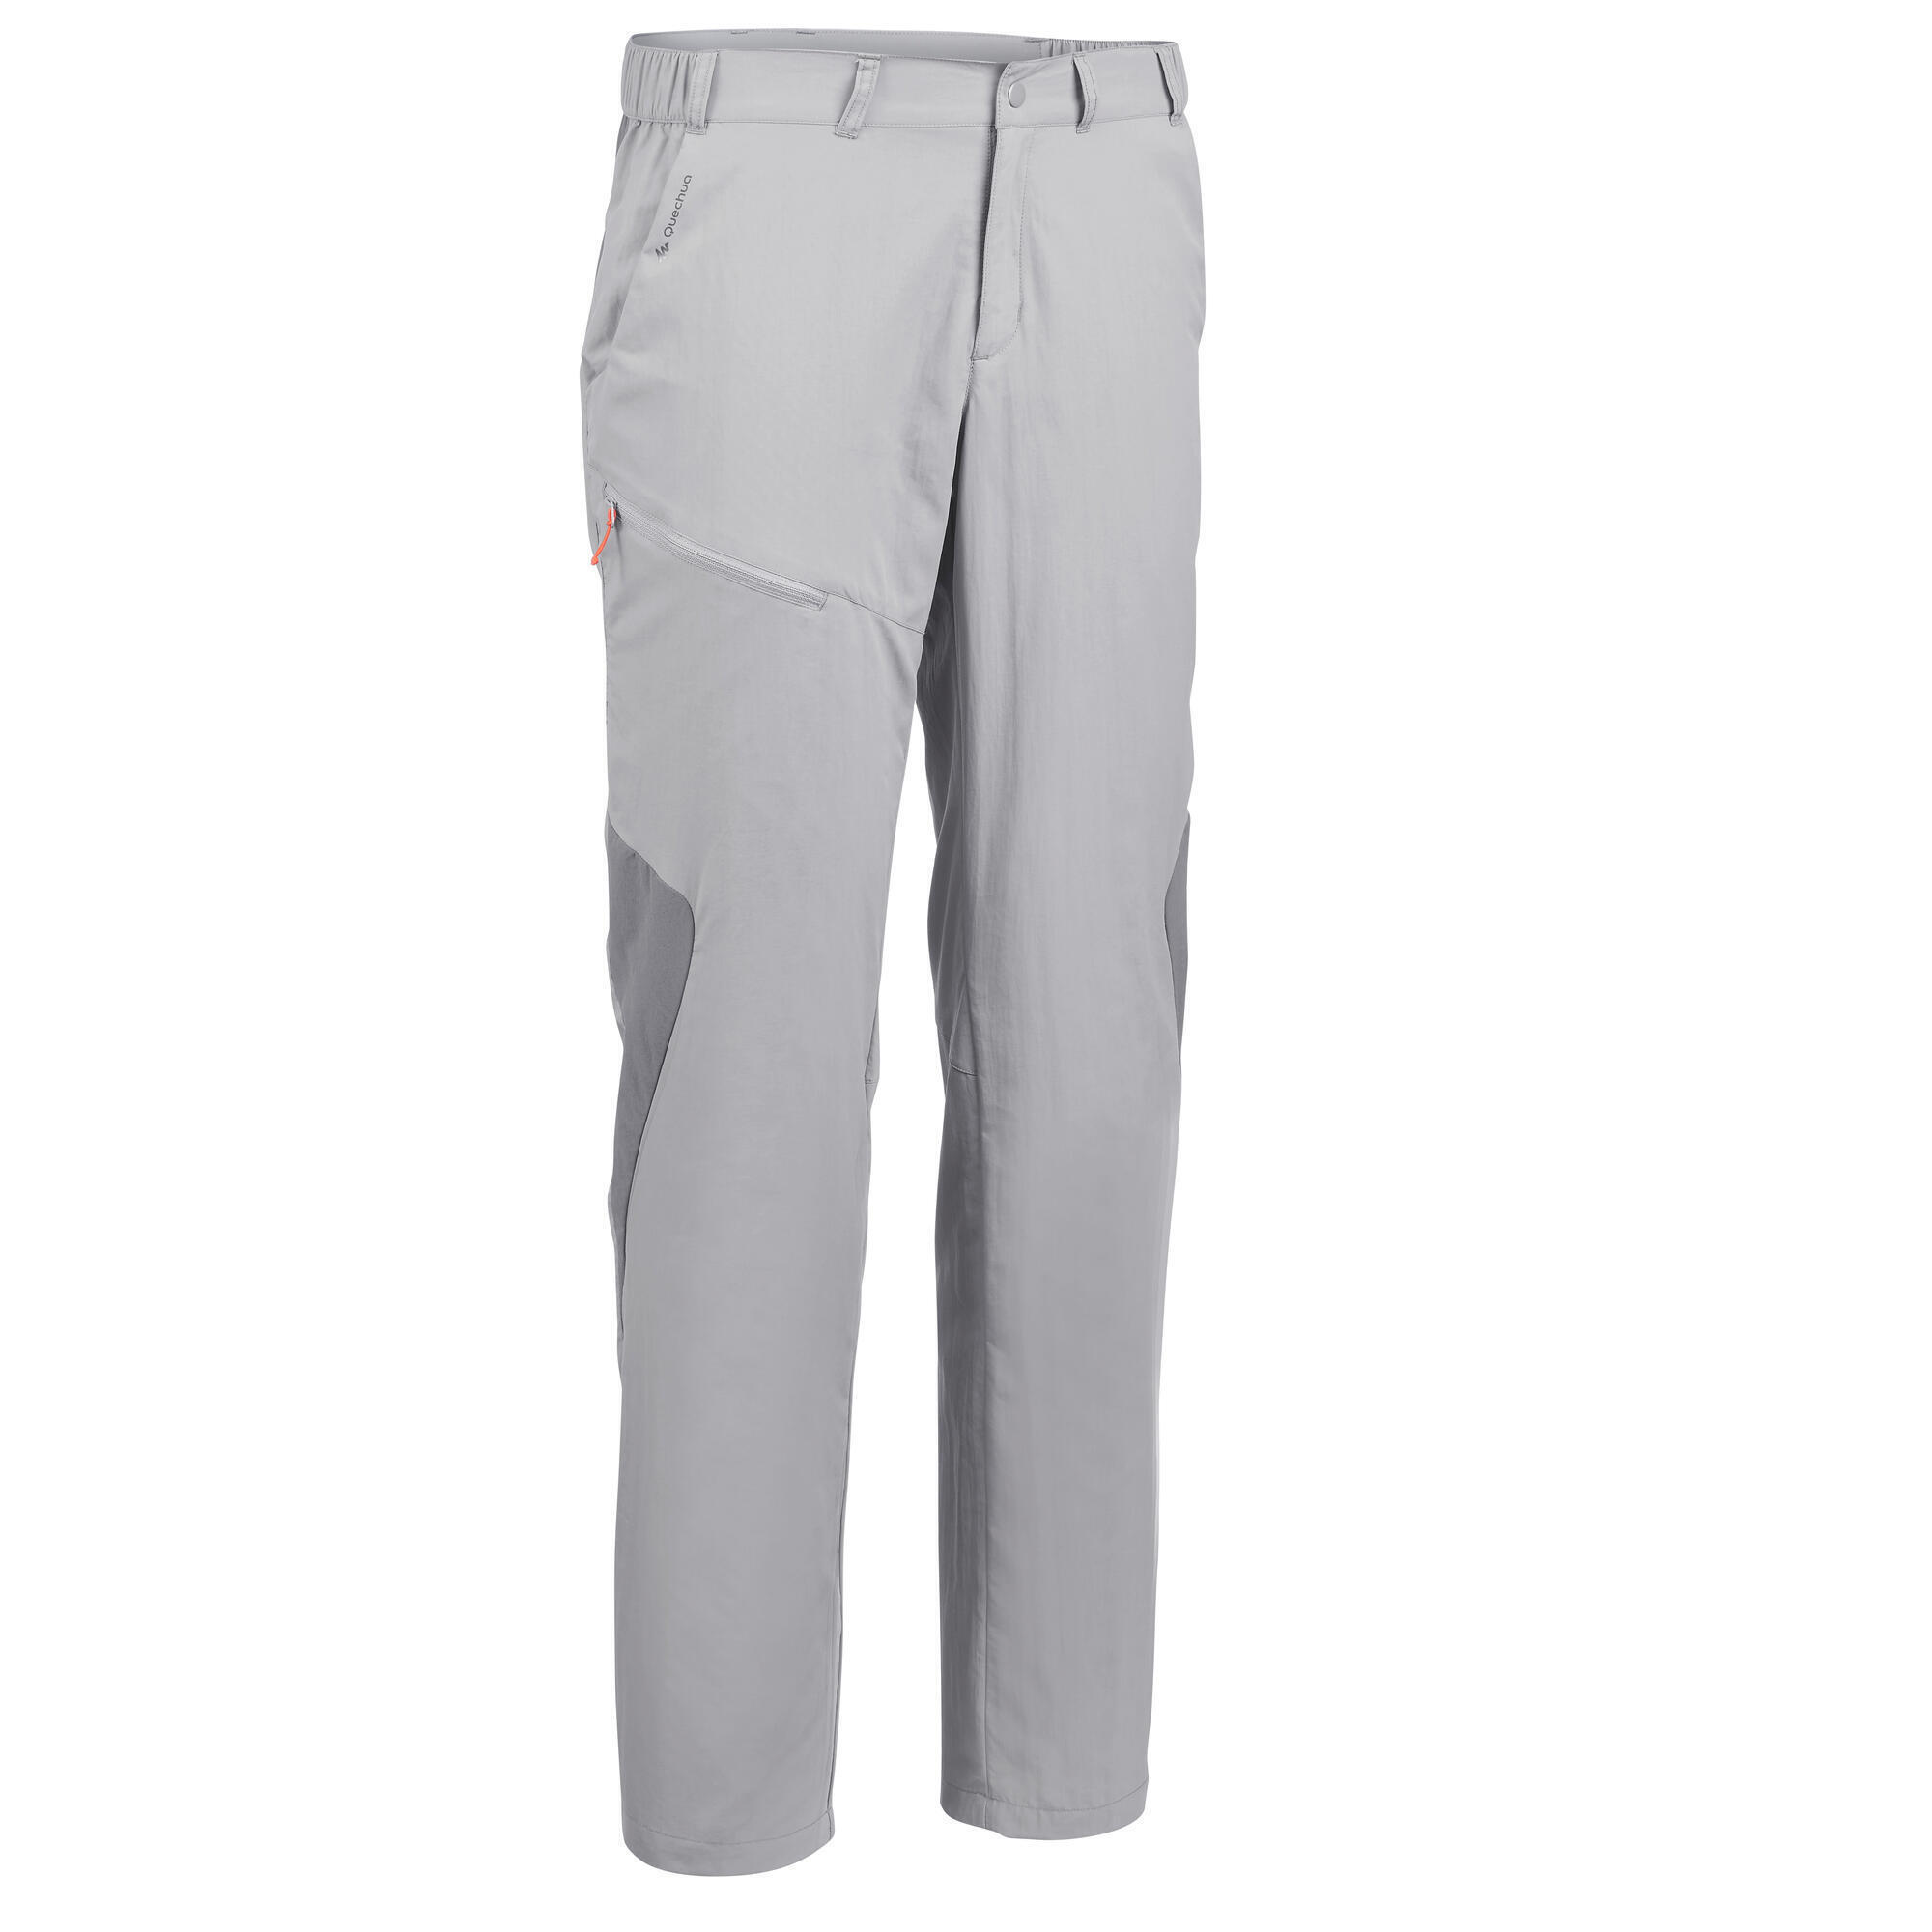 QUECHUA by Decathlon Relaxed Men Black Trousers - Buy QUECHUA by Decathlon  Relaxed Men Black Trousers Online at Best Prices in India | Flipkart.com